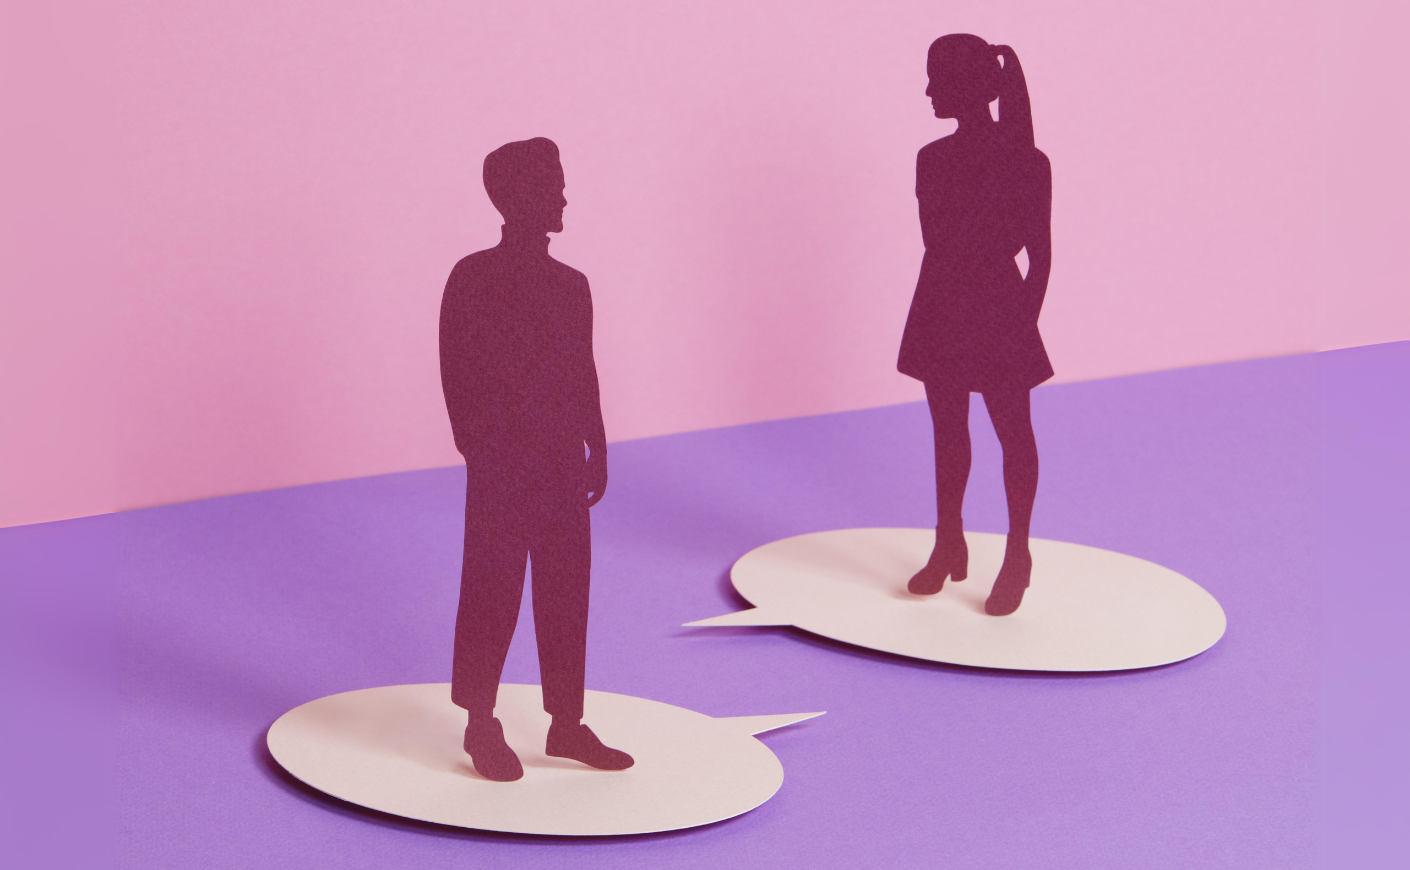 Illustration of a couple facing one another, standing on cutouts of thought bubbles